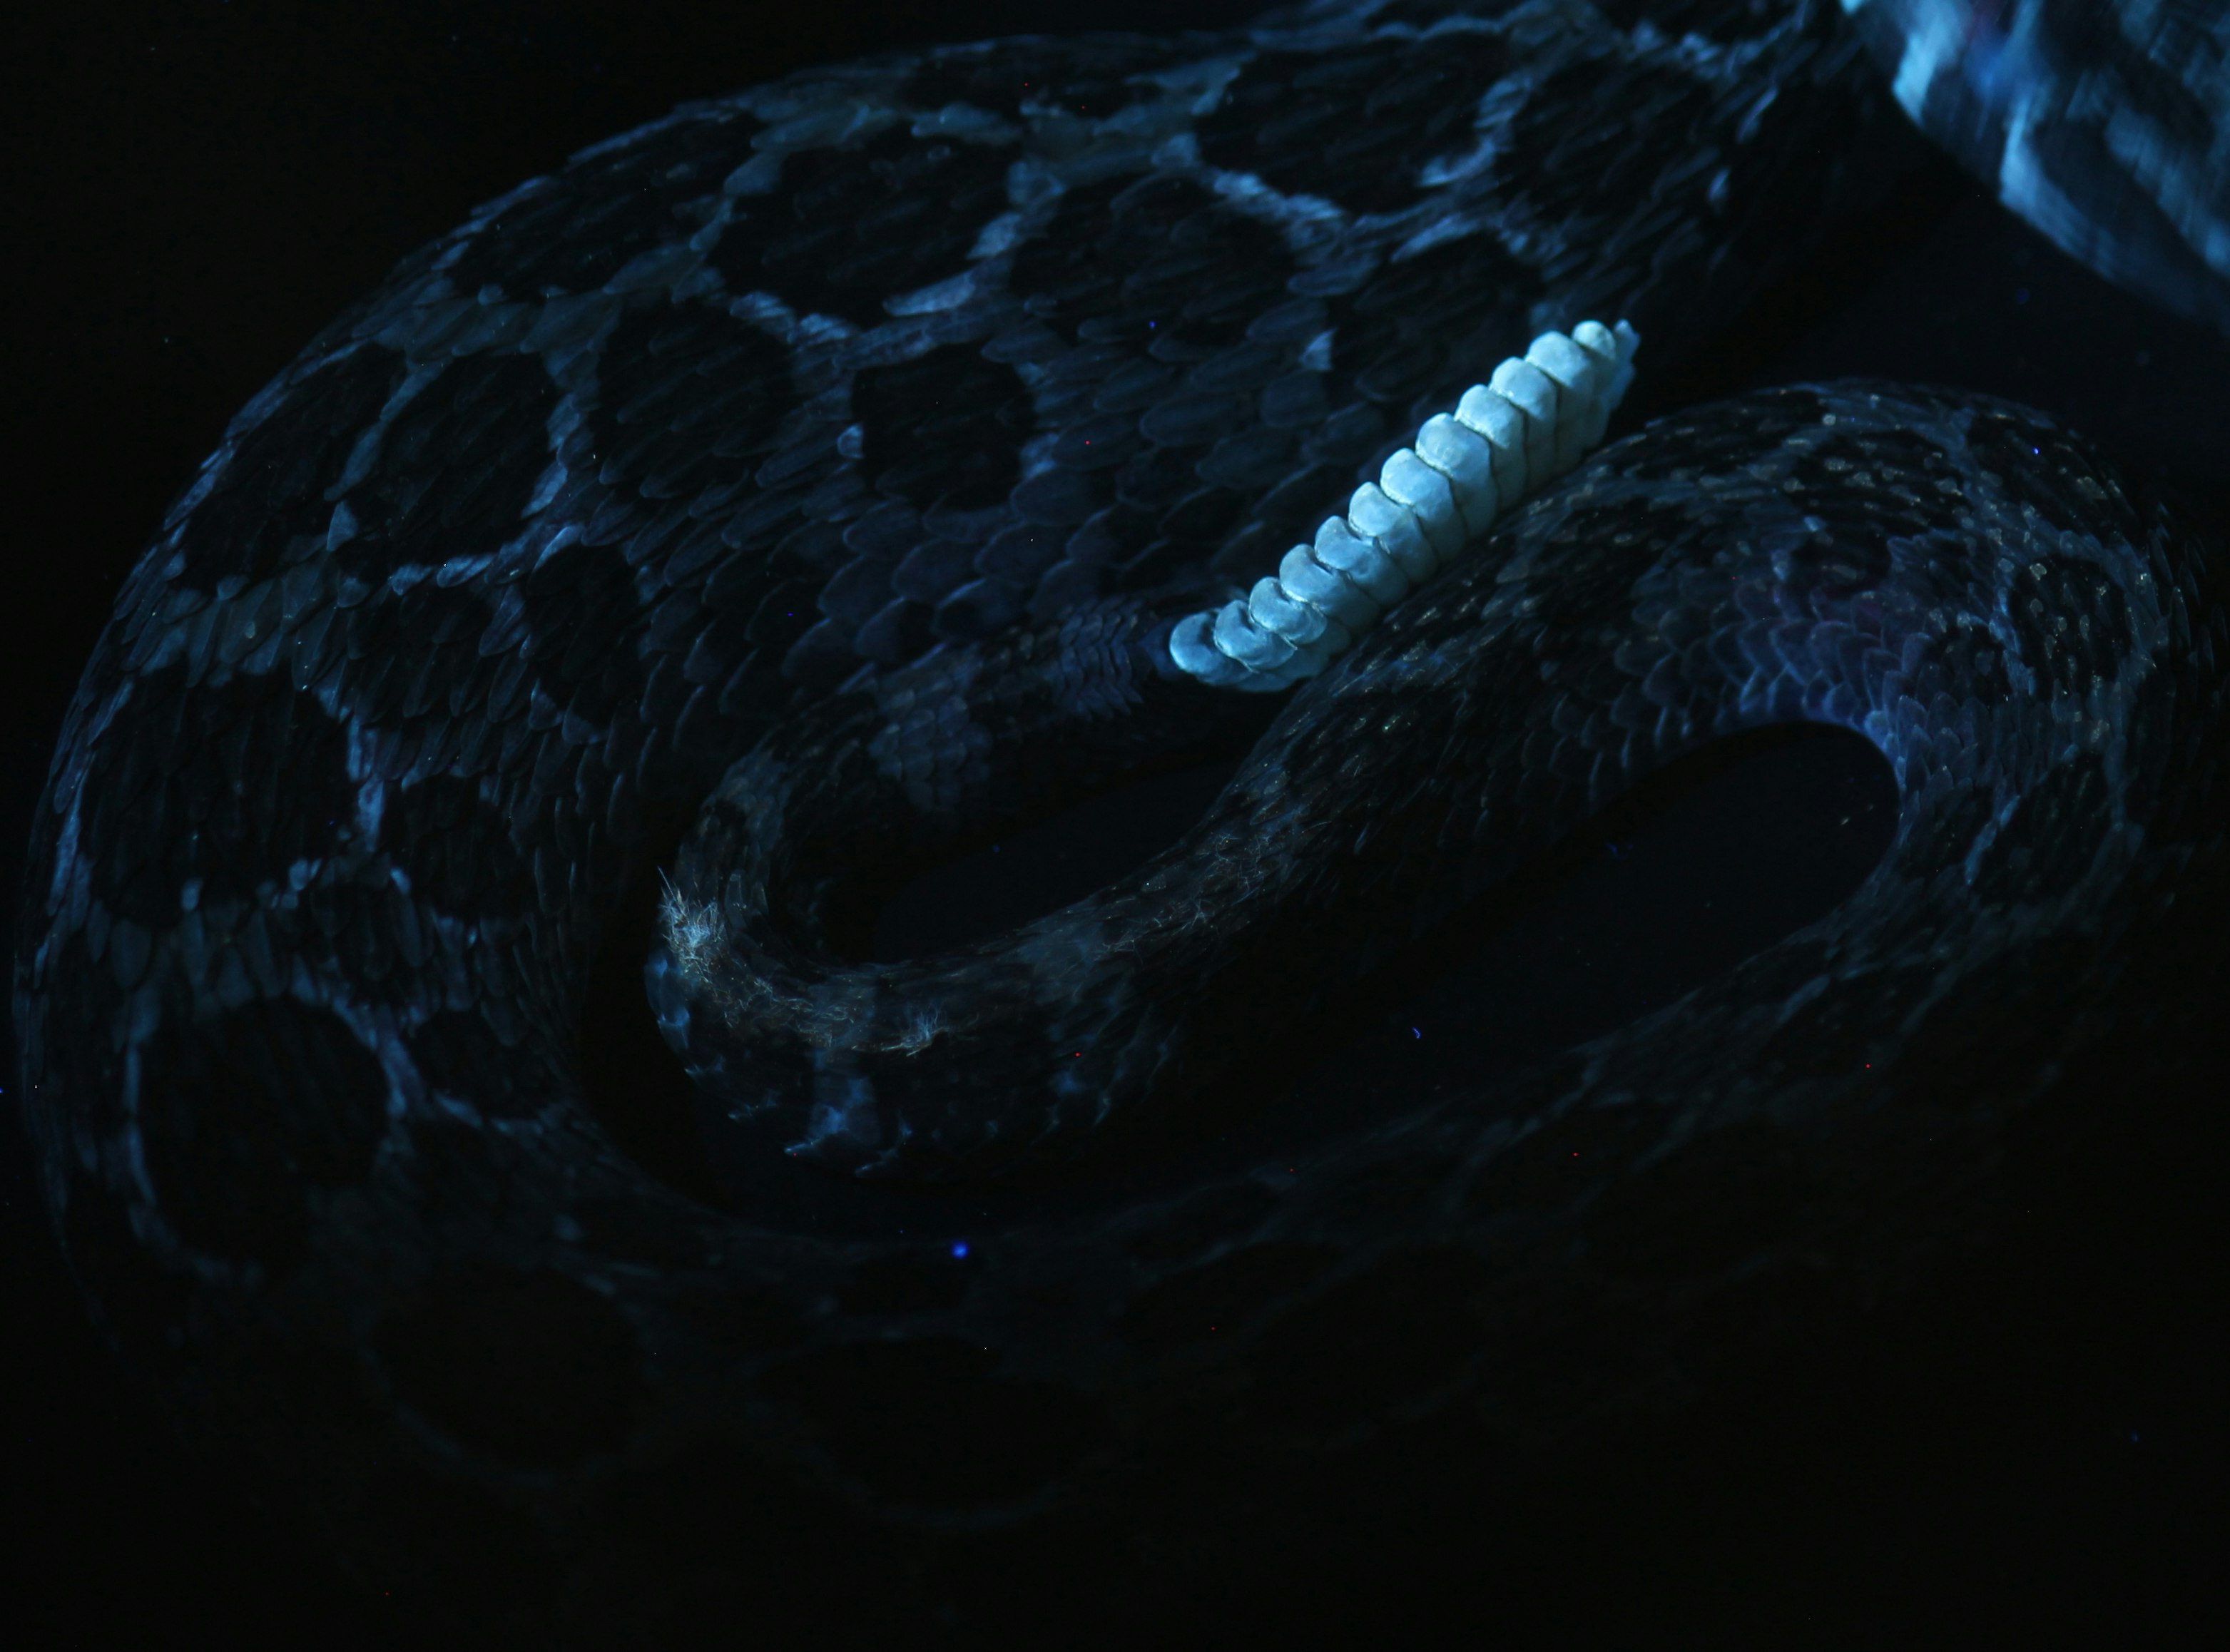 Photo of a Mexican lance-headed rattlesnake (Crotalus polystictus) rattle fluorescence under UV light